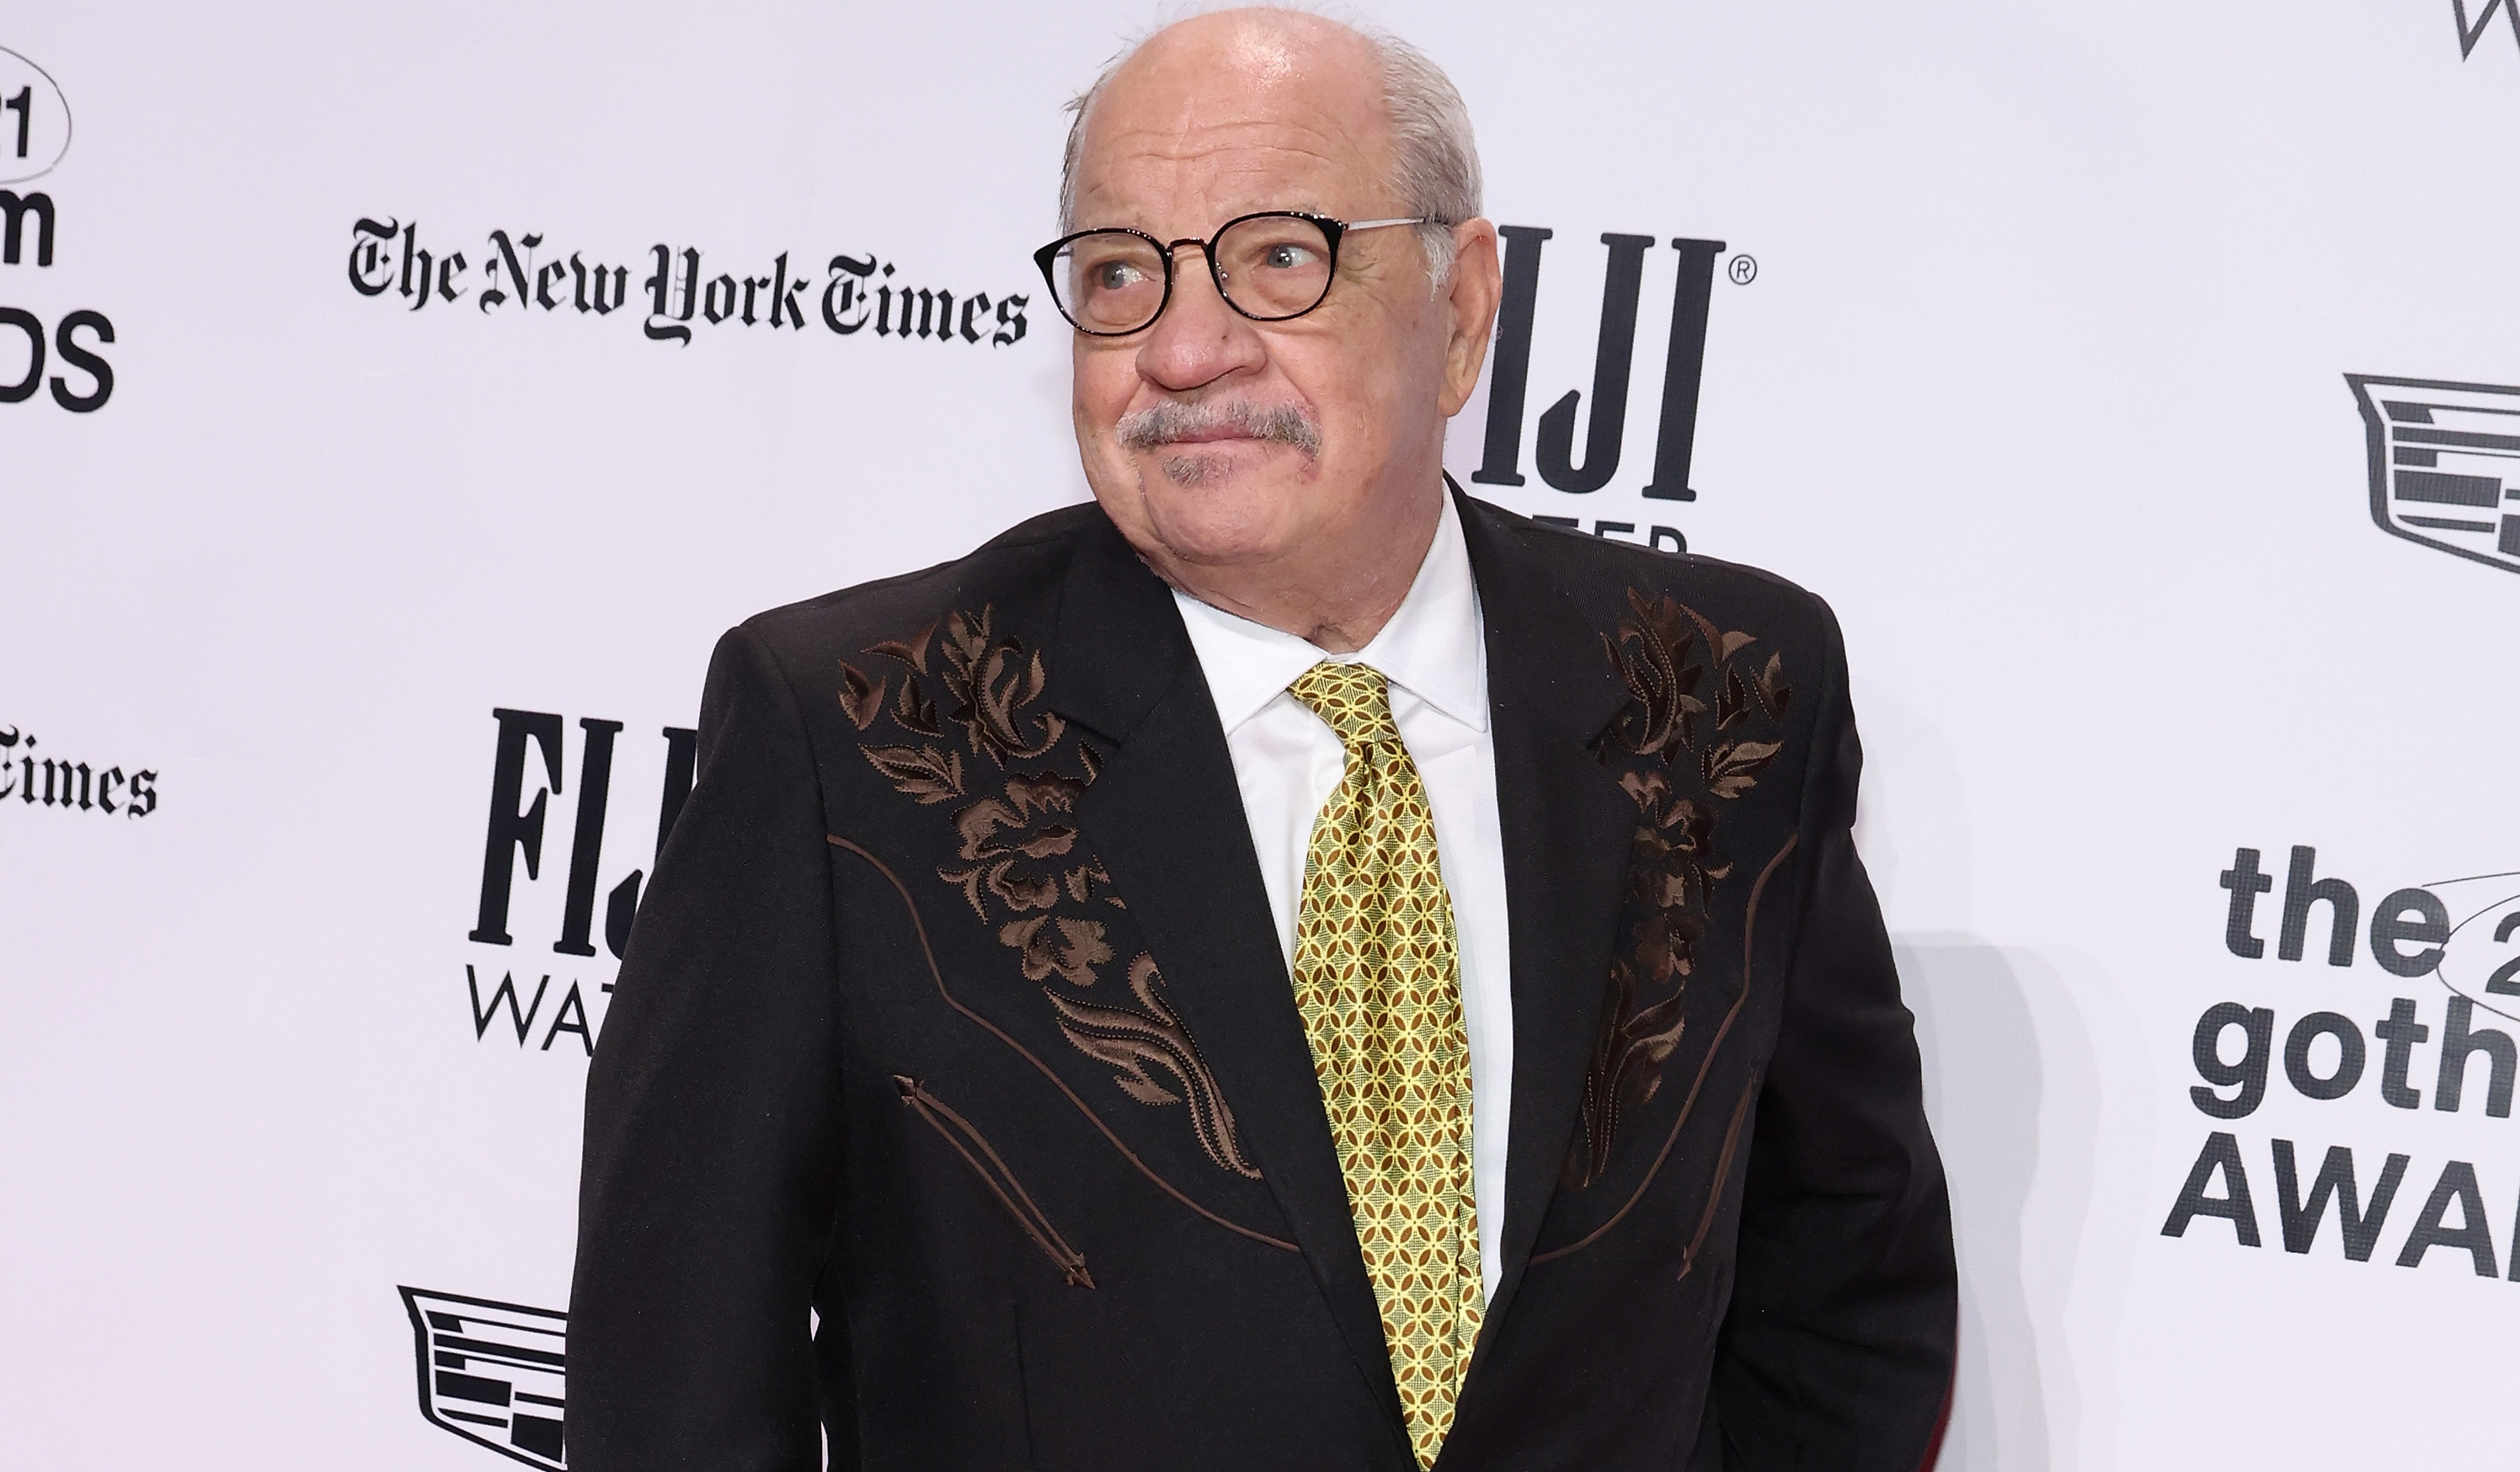 NEW YORK, NEW YORK - NOVEMBER 29: Paul Schrader attends the 2021 Gotham Awards at Cipriani Wall Street on November 29, 2021 in New York City. (Photo by Taylor Hill/FilmMagic)